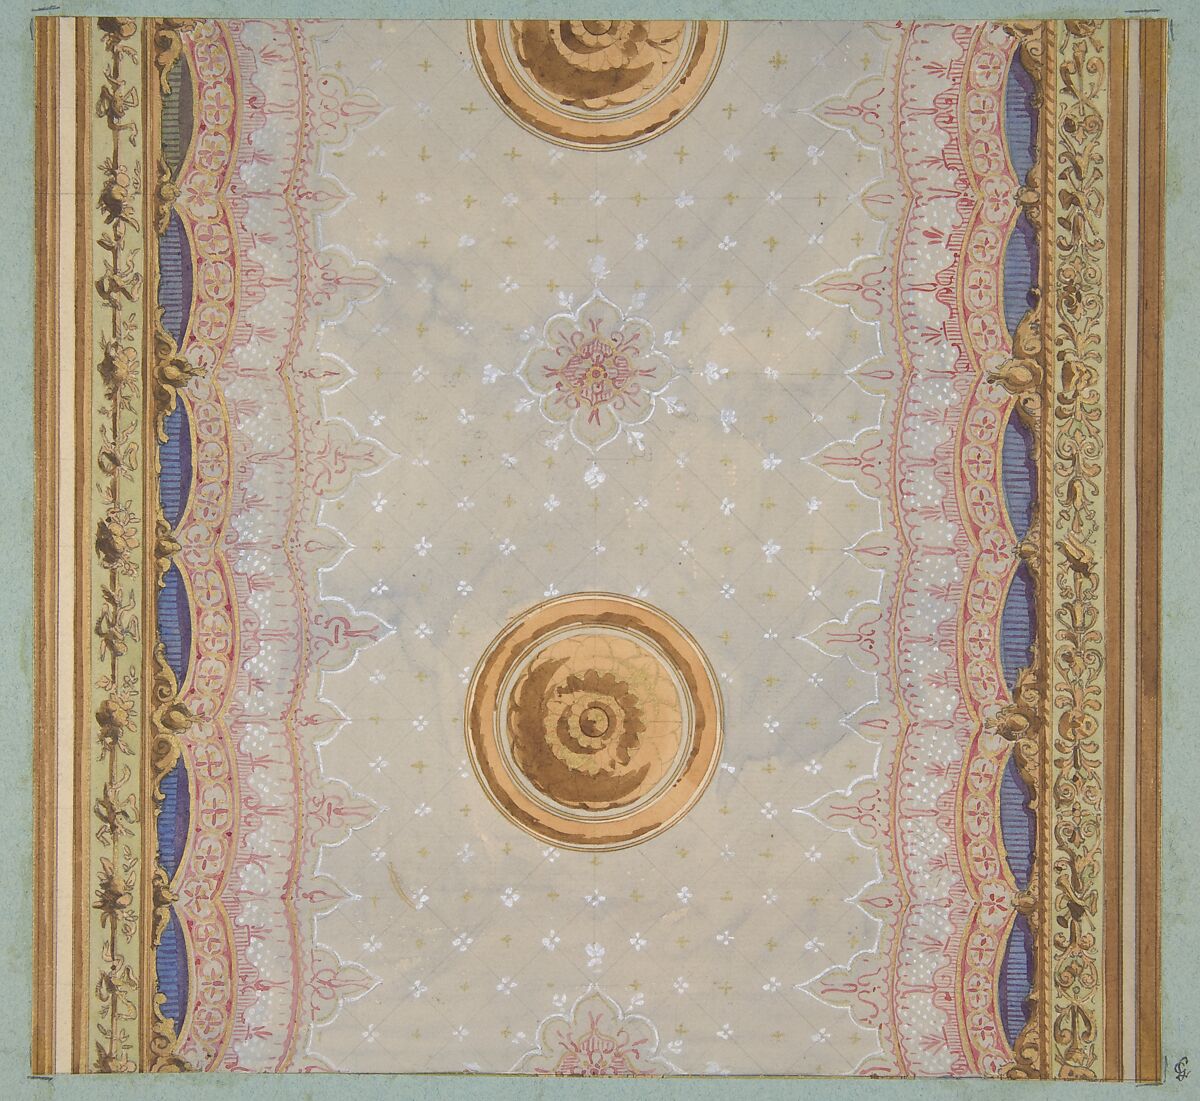 A design for the painted decoration of a ceiling or walls, Jules-Edmond-Charles Lachaise (French, died 1897), graphite, pen and ink, watercolor, and gold paint on laid paper mounted on blue wove paper 